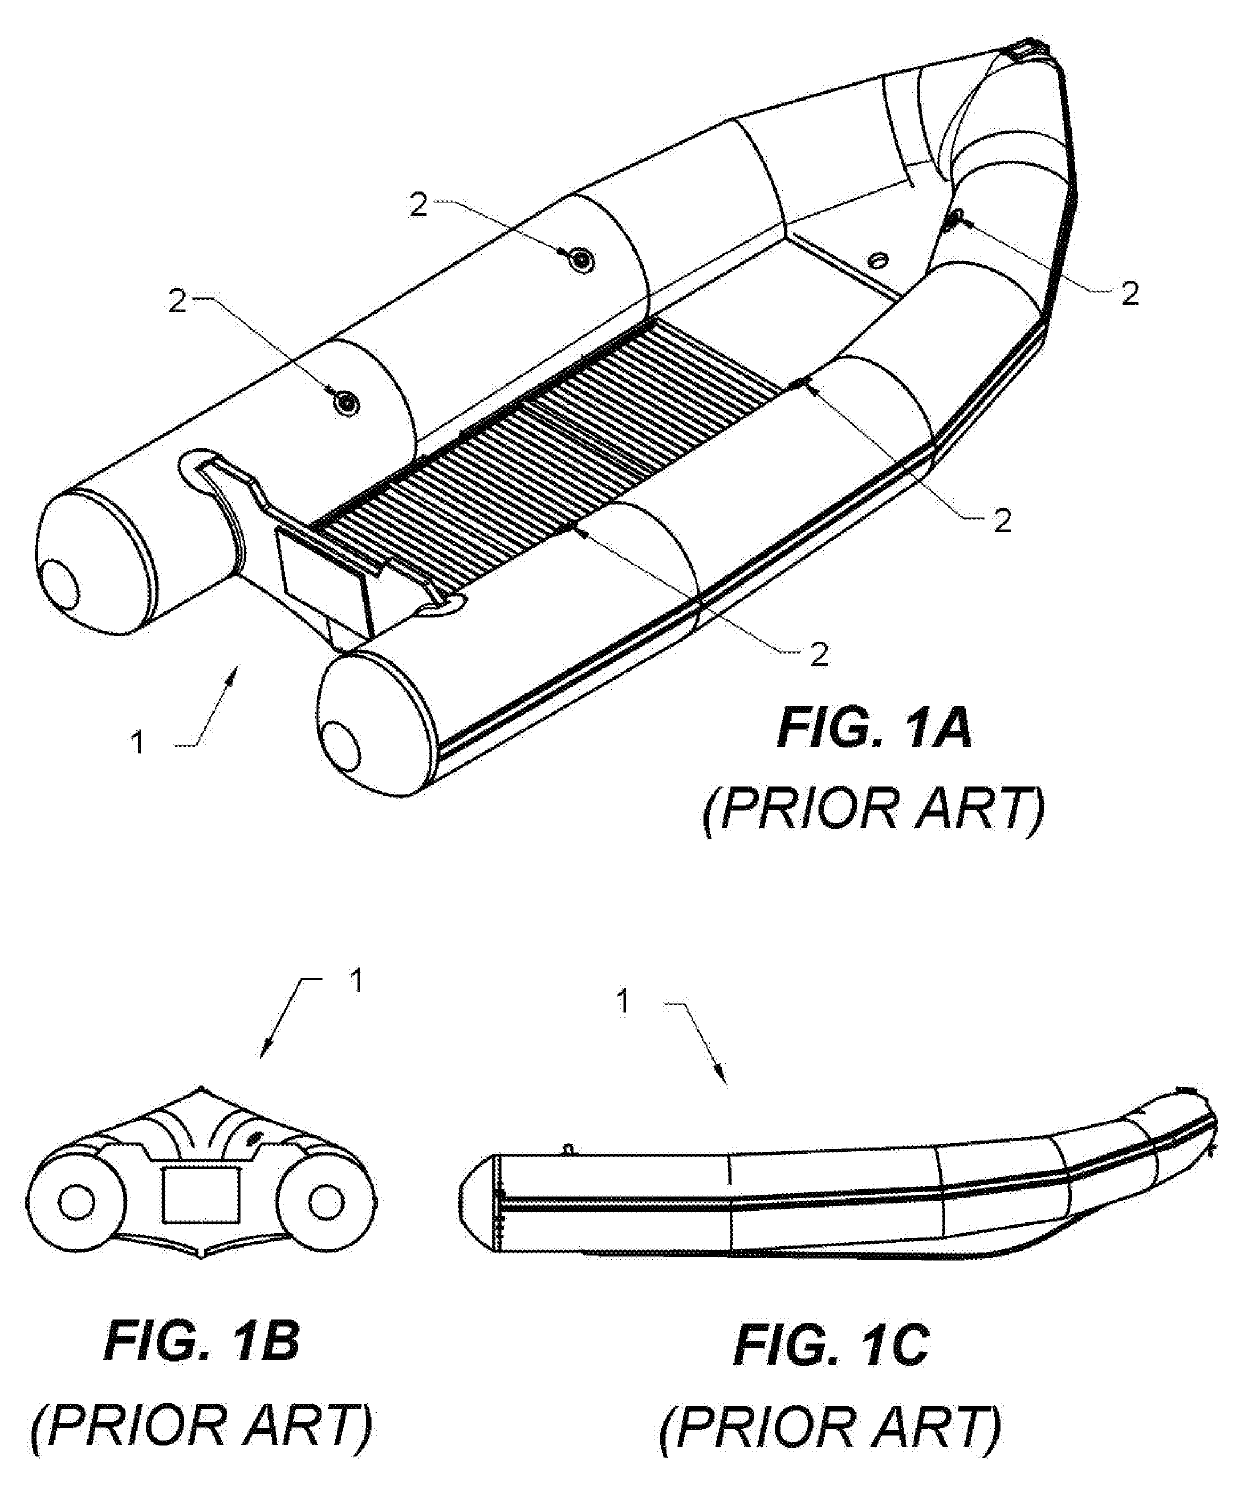 Insertable bladder system for inflatable boat repair